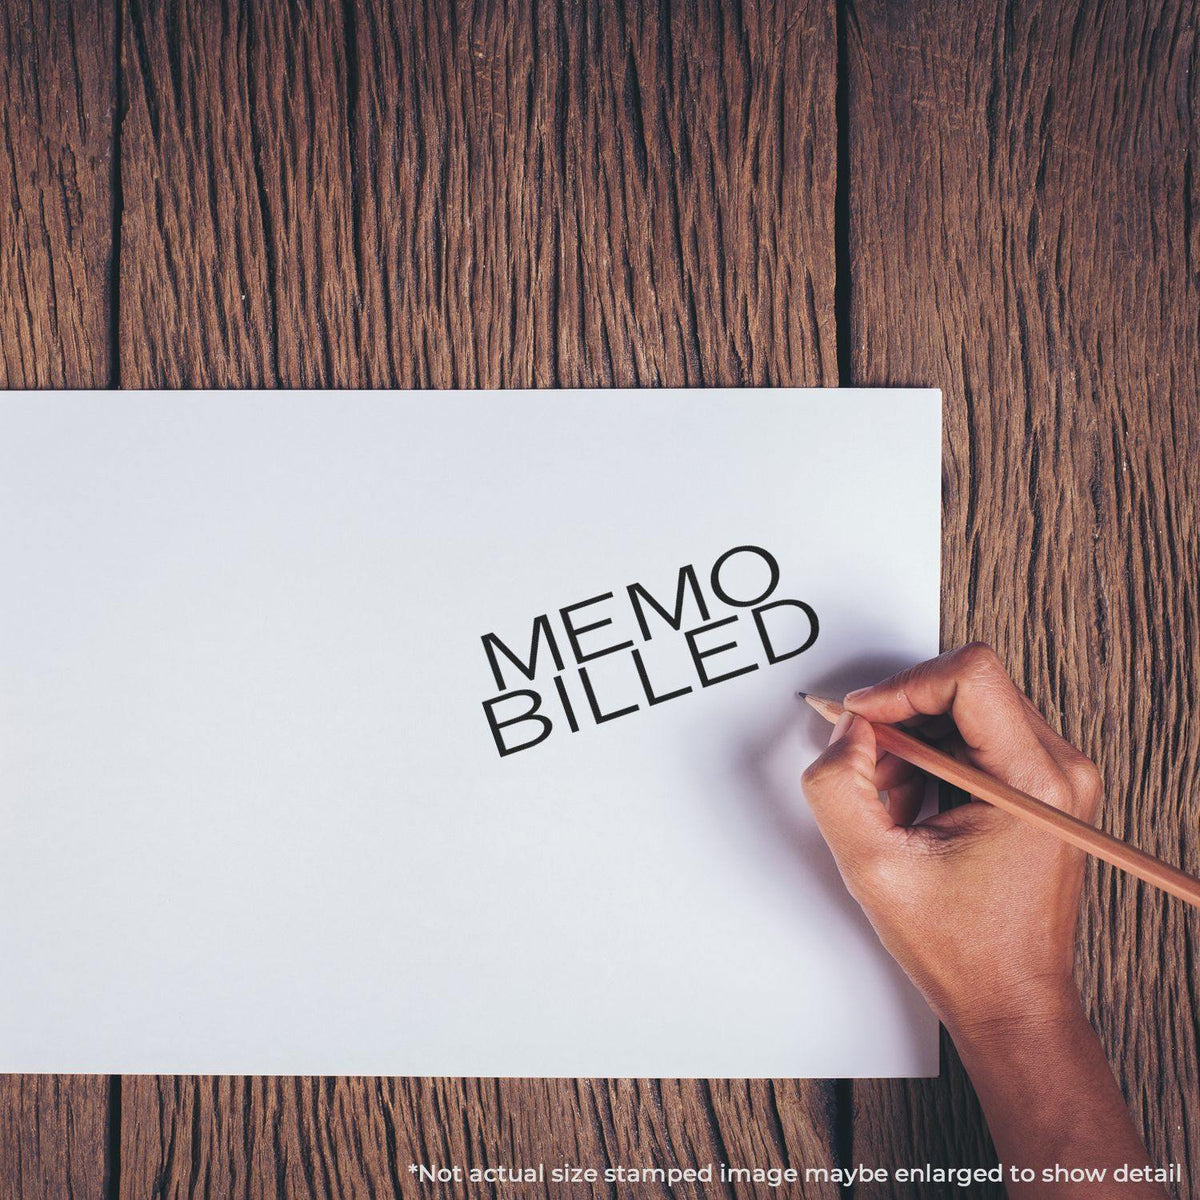 Large Memo Billed Rubber Stamp In Use Photo